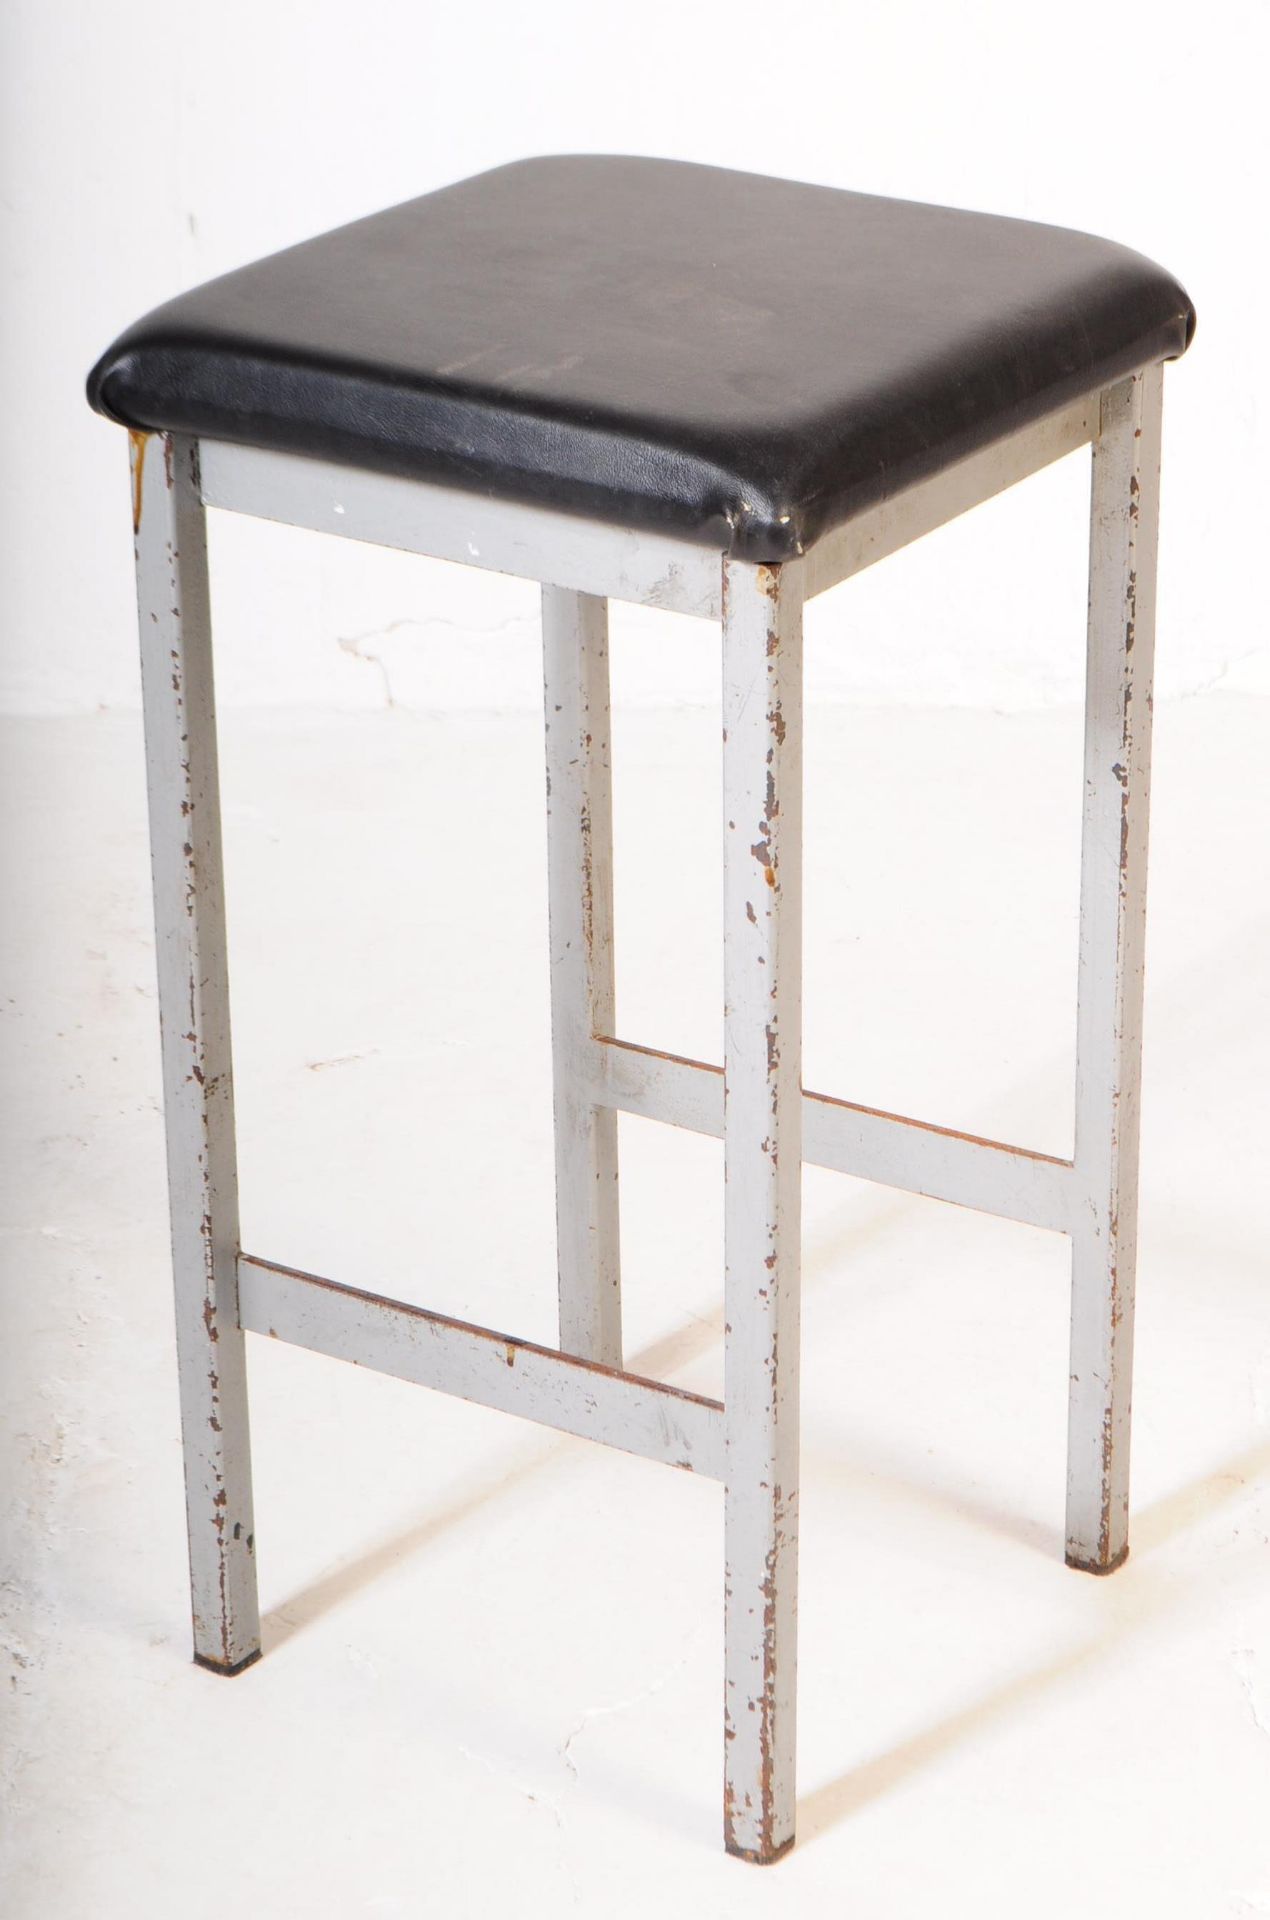 TWO 20TH CENTURY METAL CONSTRUCT BAR STOOLS - Image 2 of 4